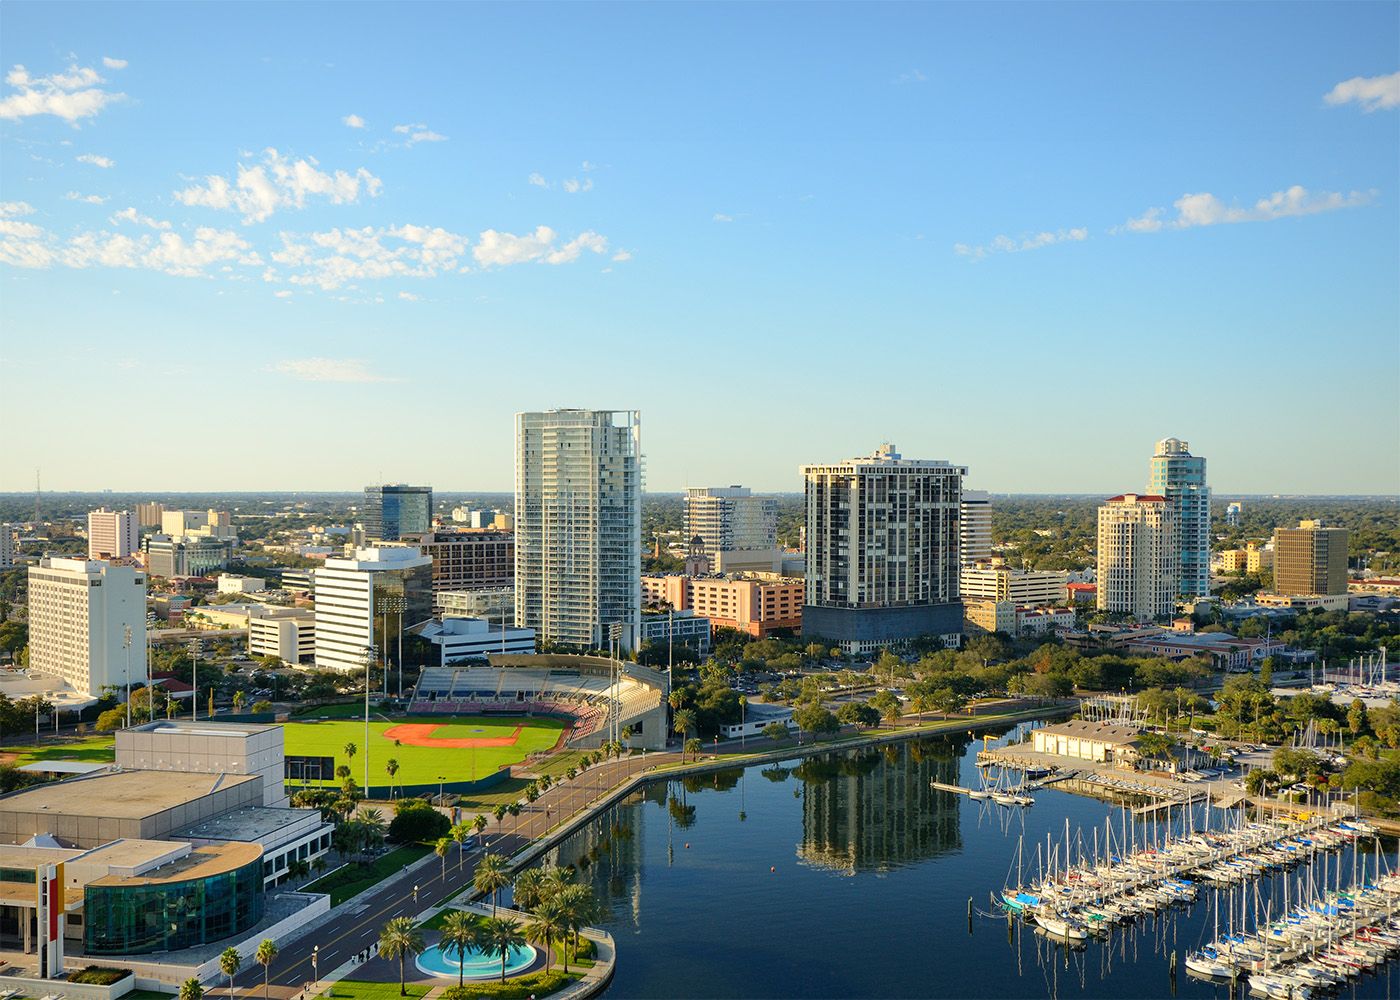 St. Petersburg, Florida from sky view